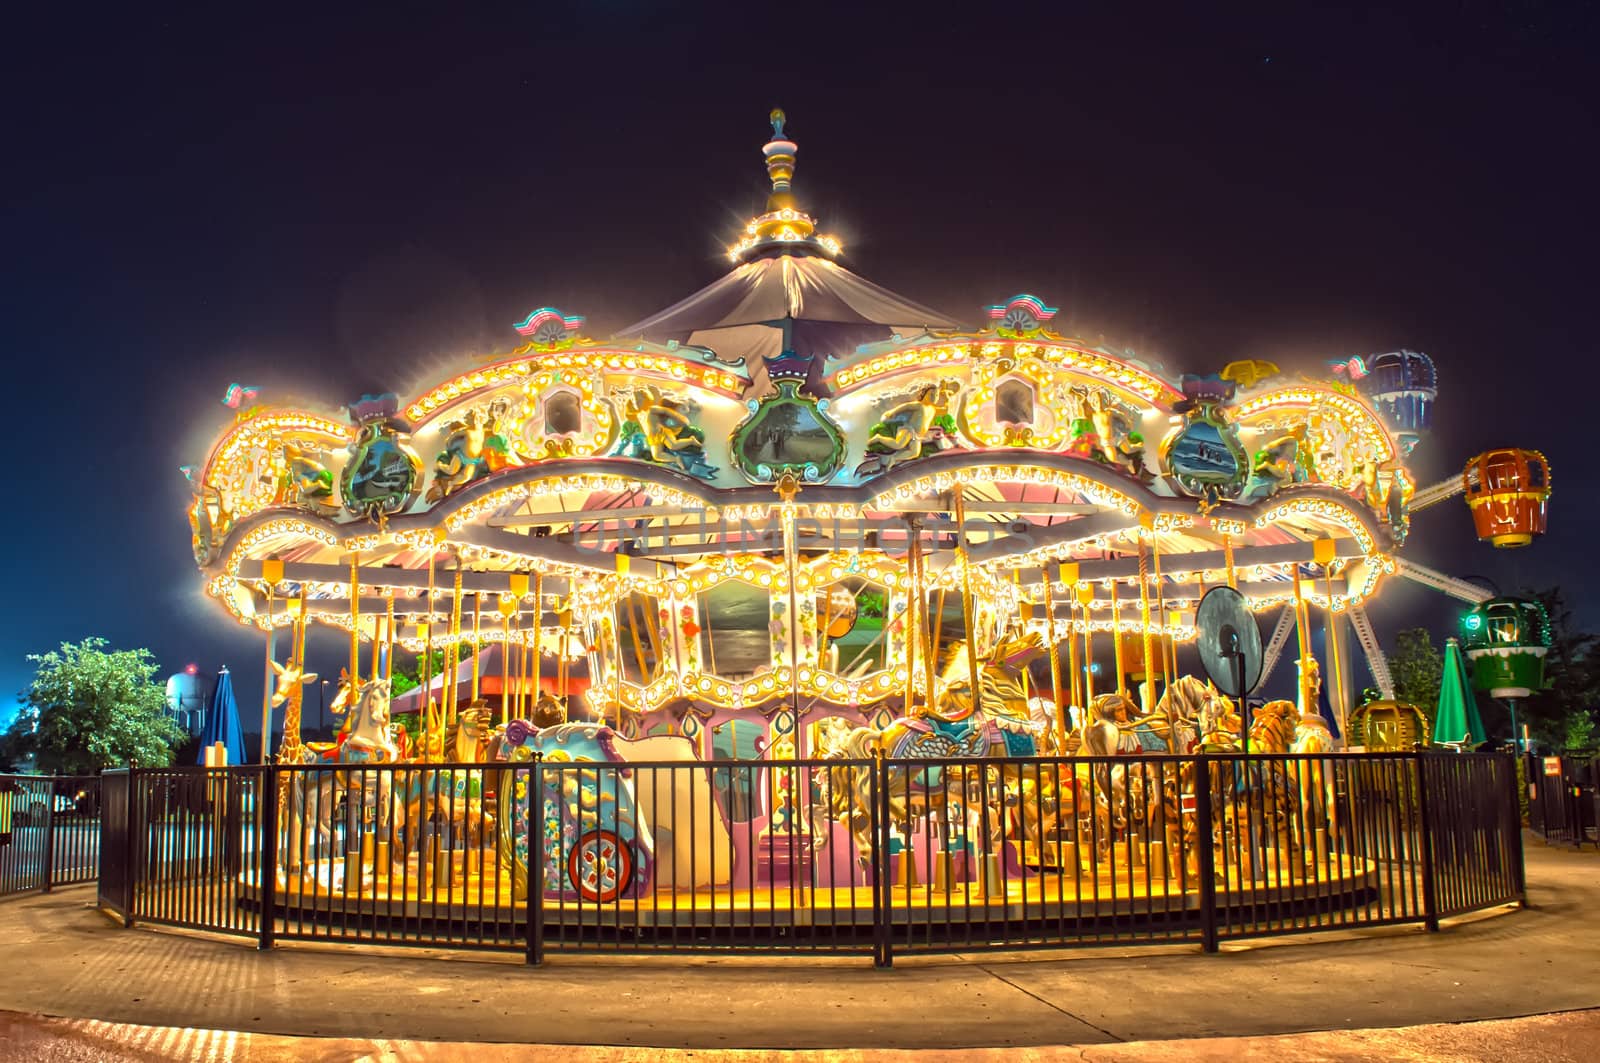 View of a carousel at night,